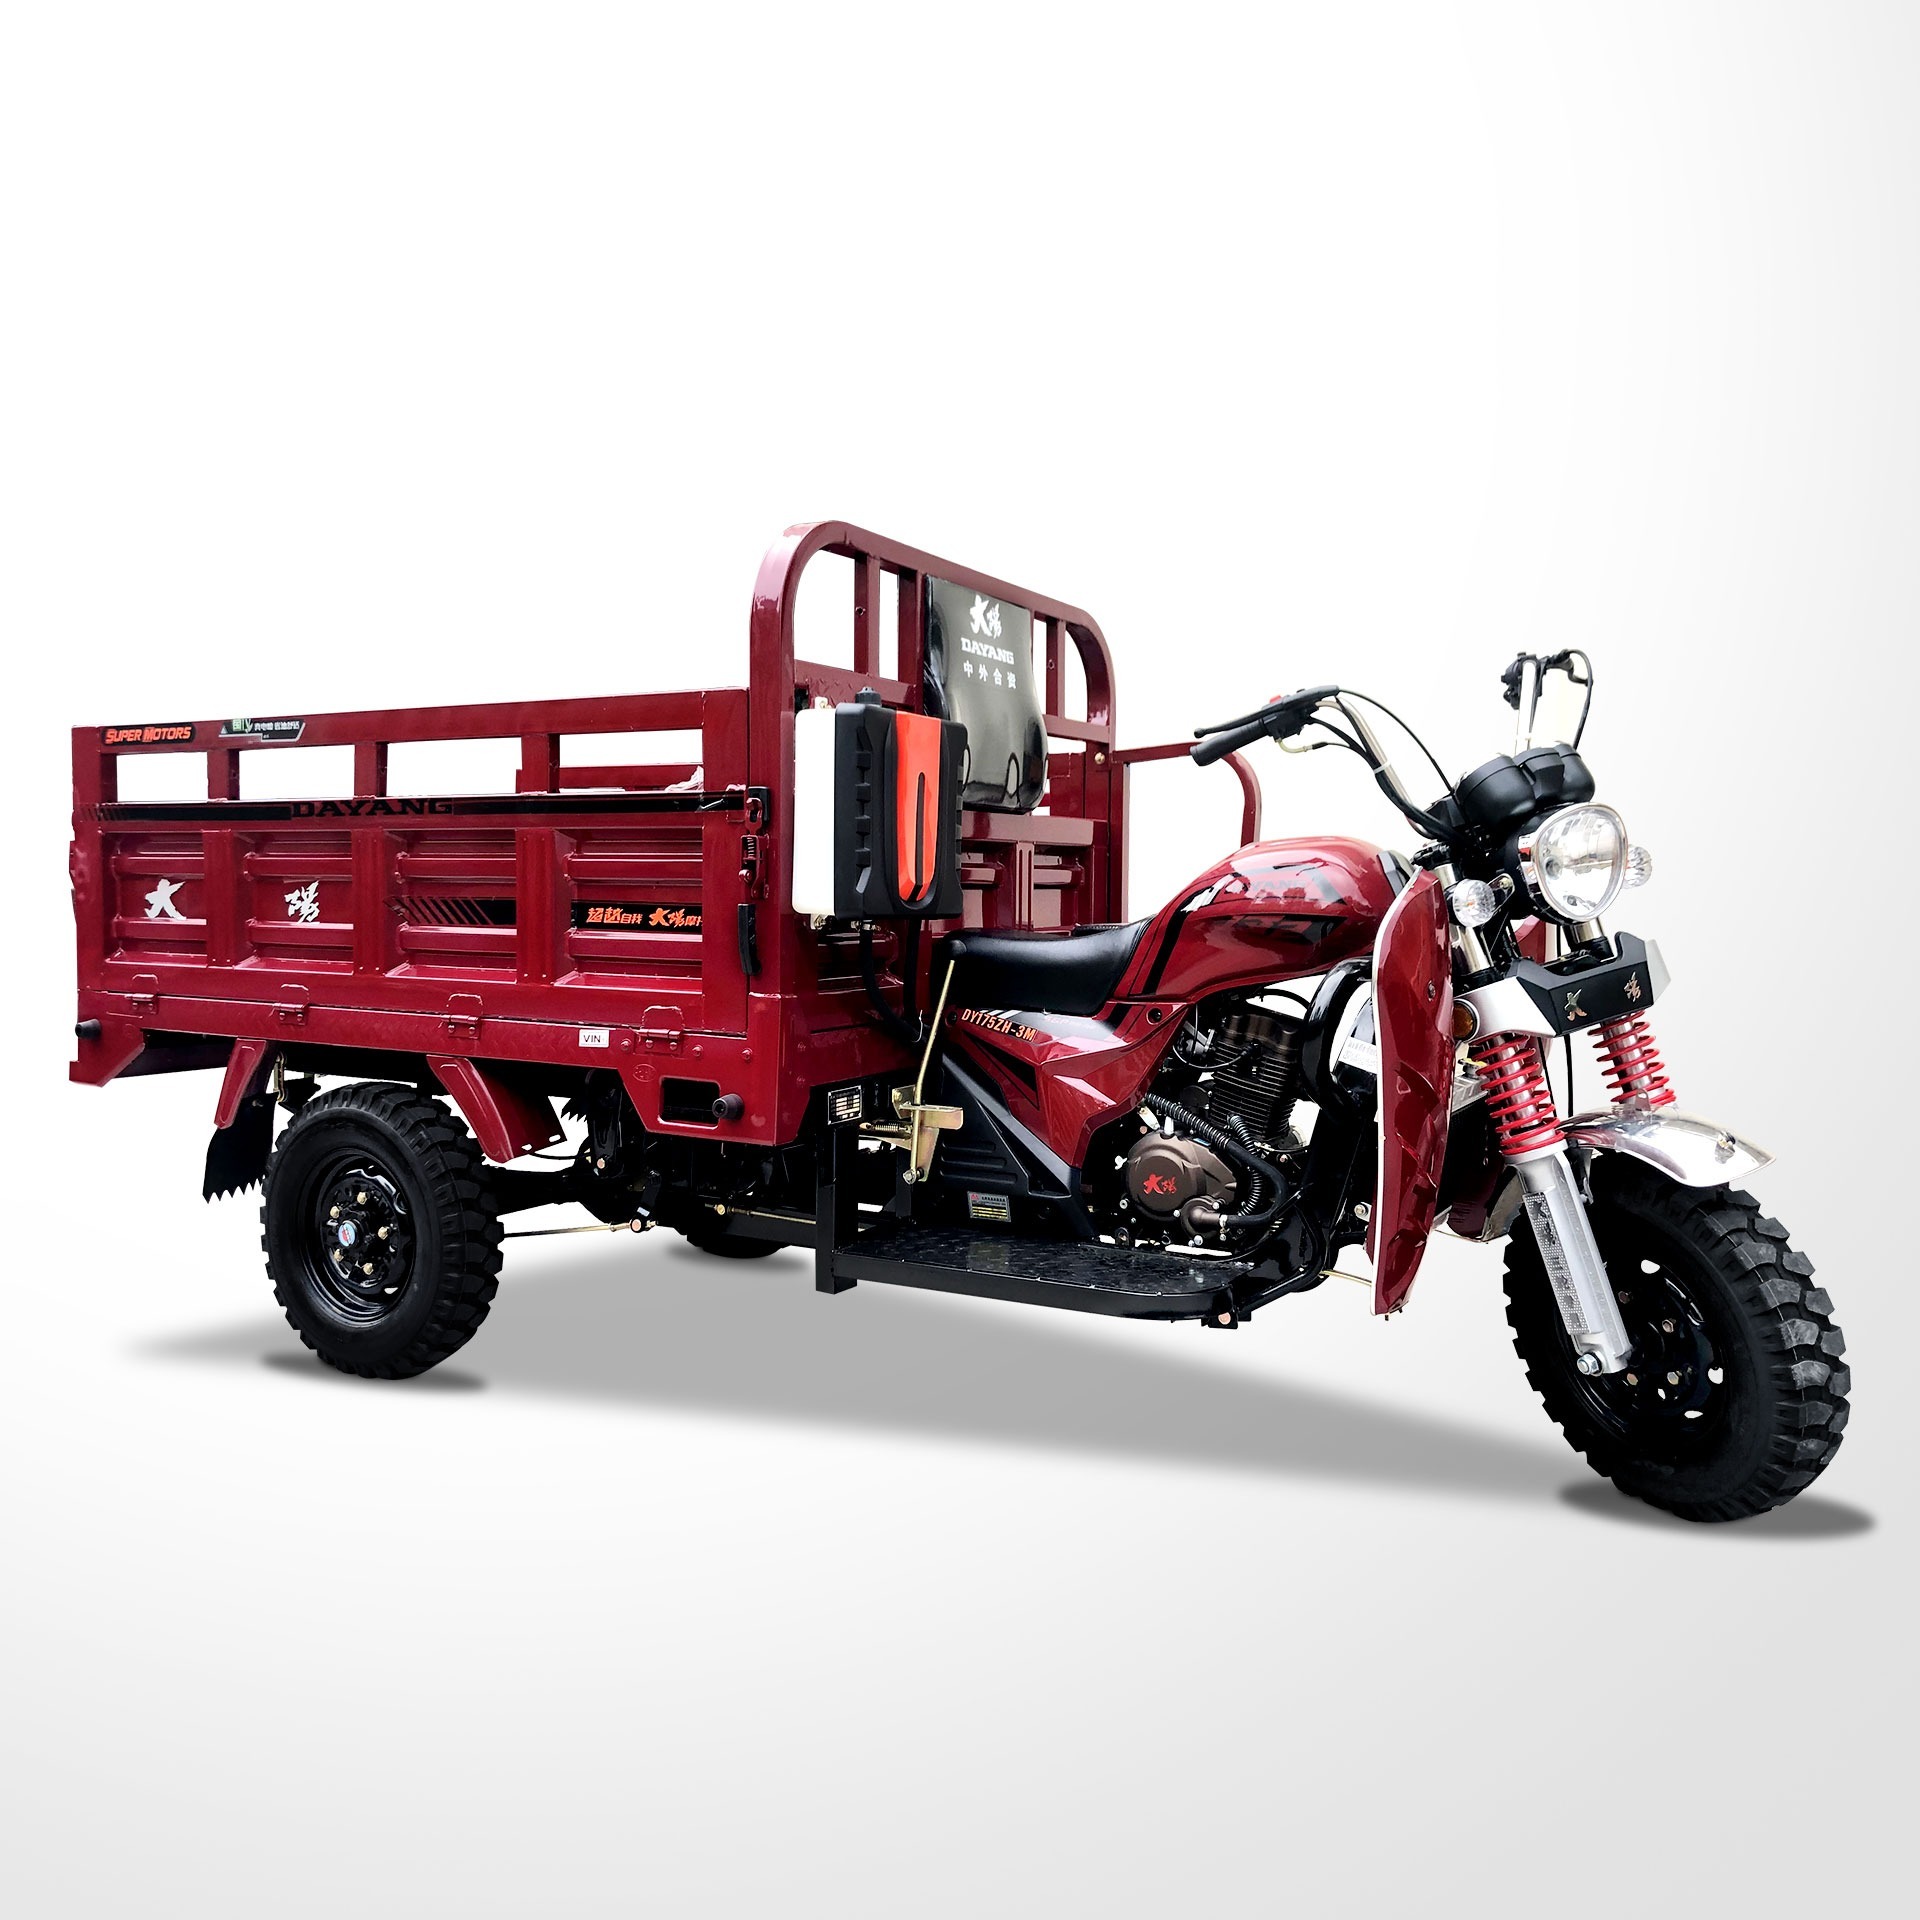 DB-4 Popular and hot selling three wheel motorcycle of 175CC/200CC/250CC cargo tricycle